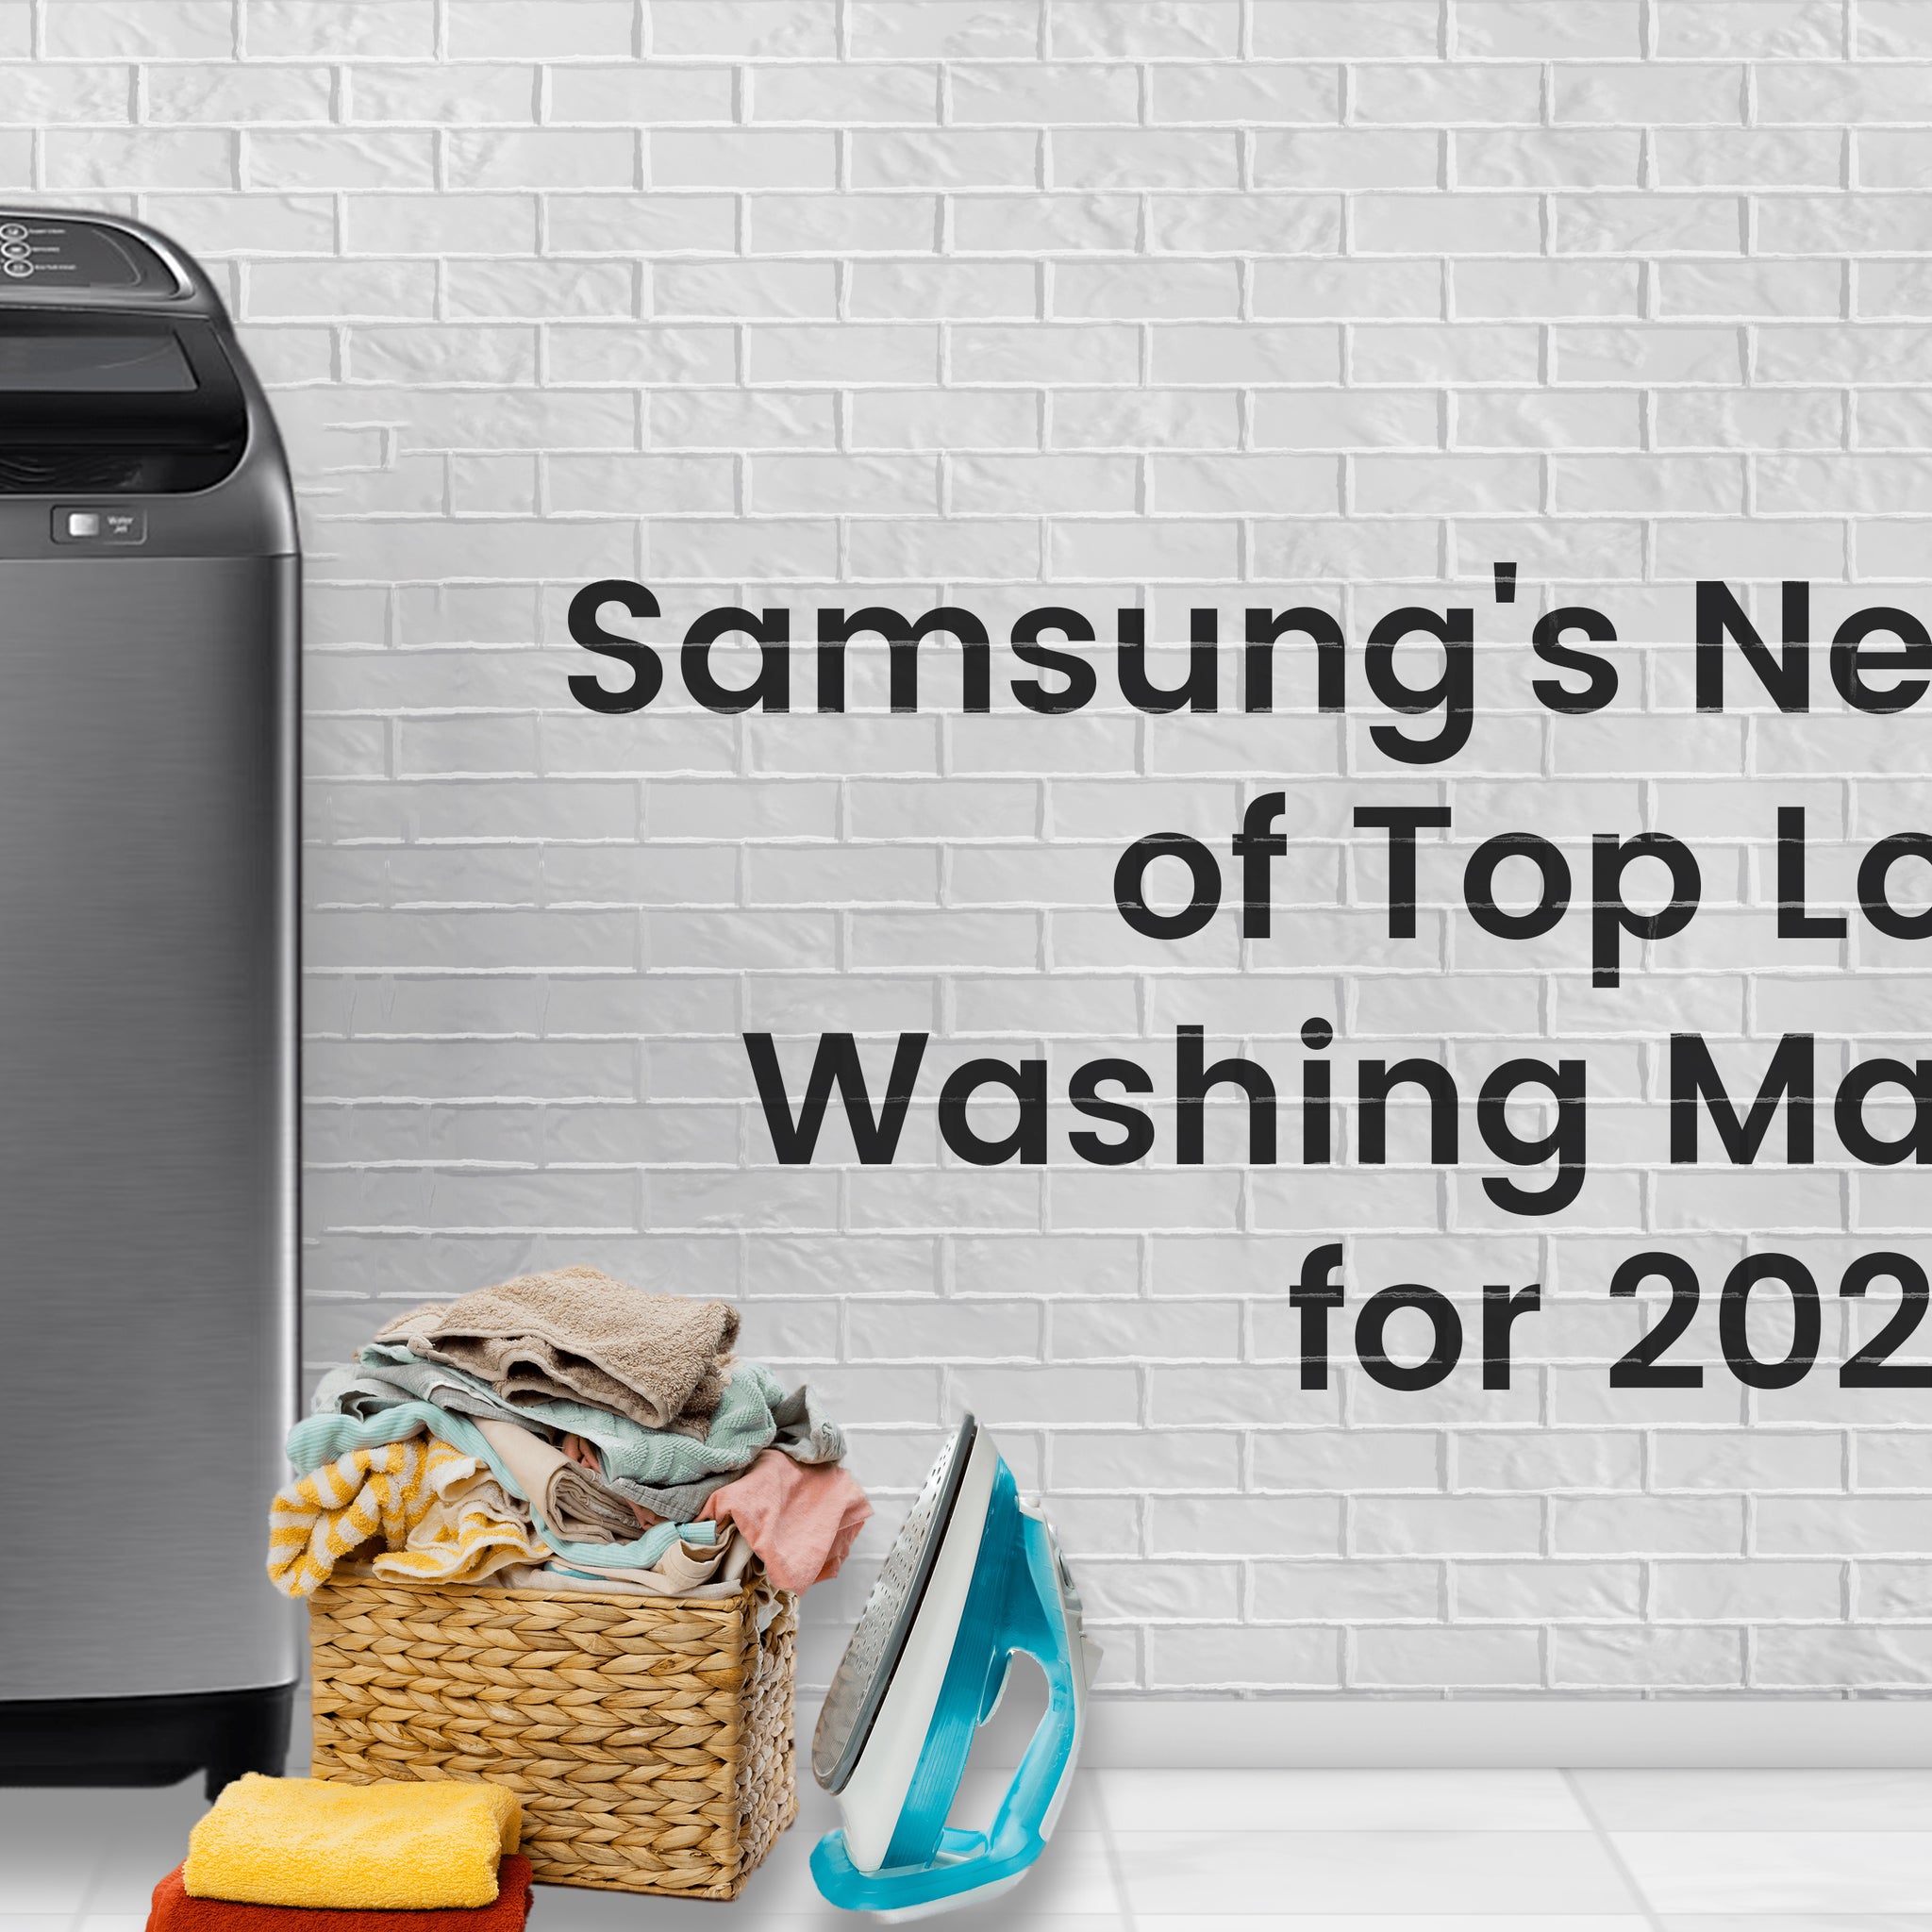 Samsung's New Range of Top Load Washing Machines for 2023